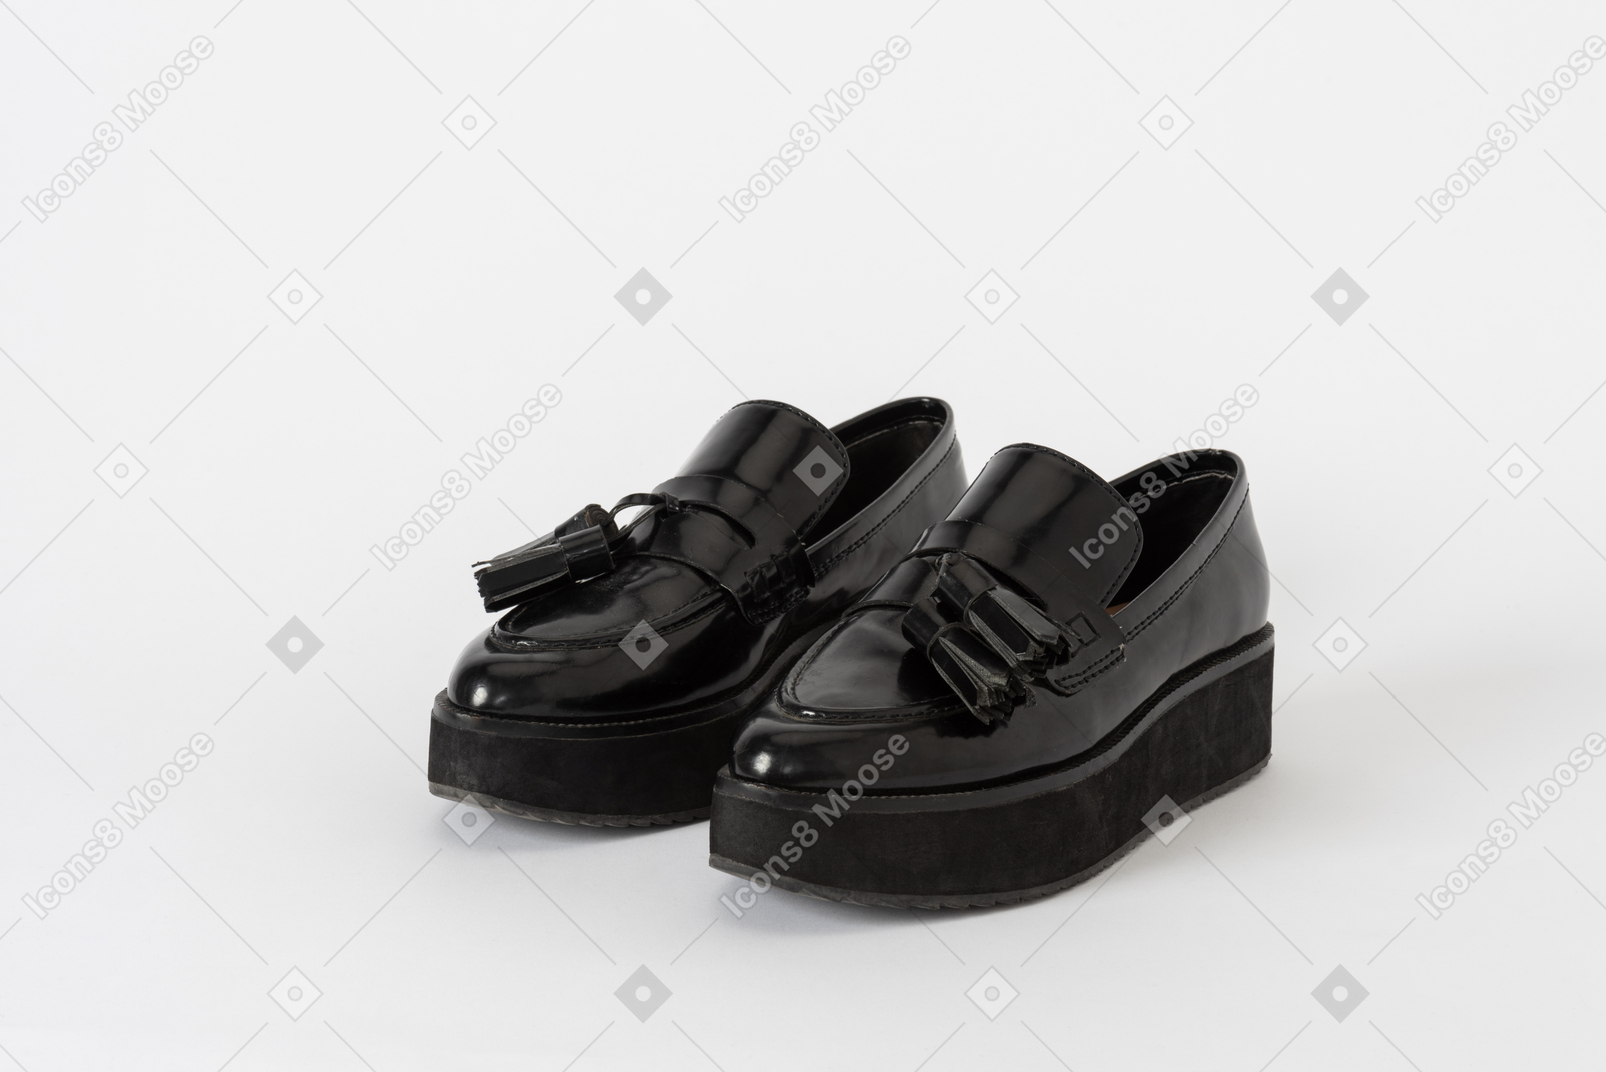 A three-quarter front shot of a pair of black lacquer platform loafer shoes